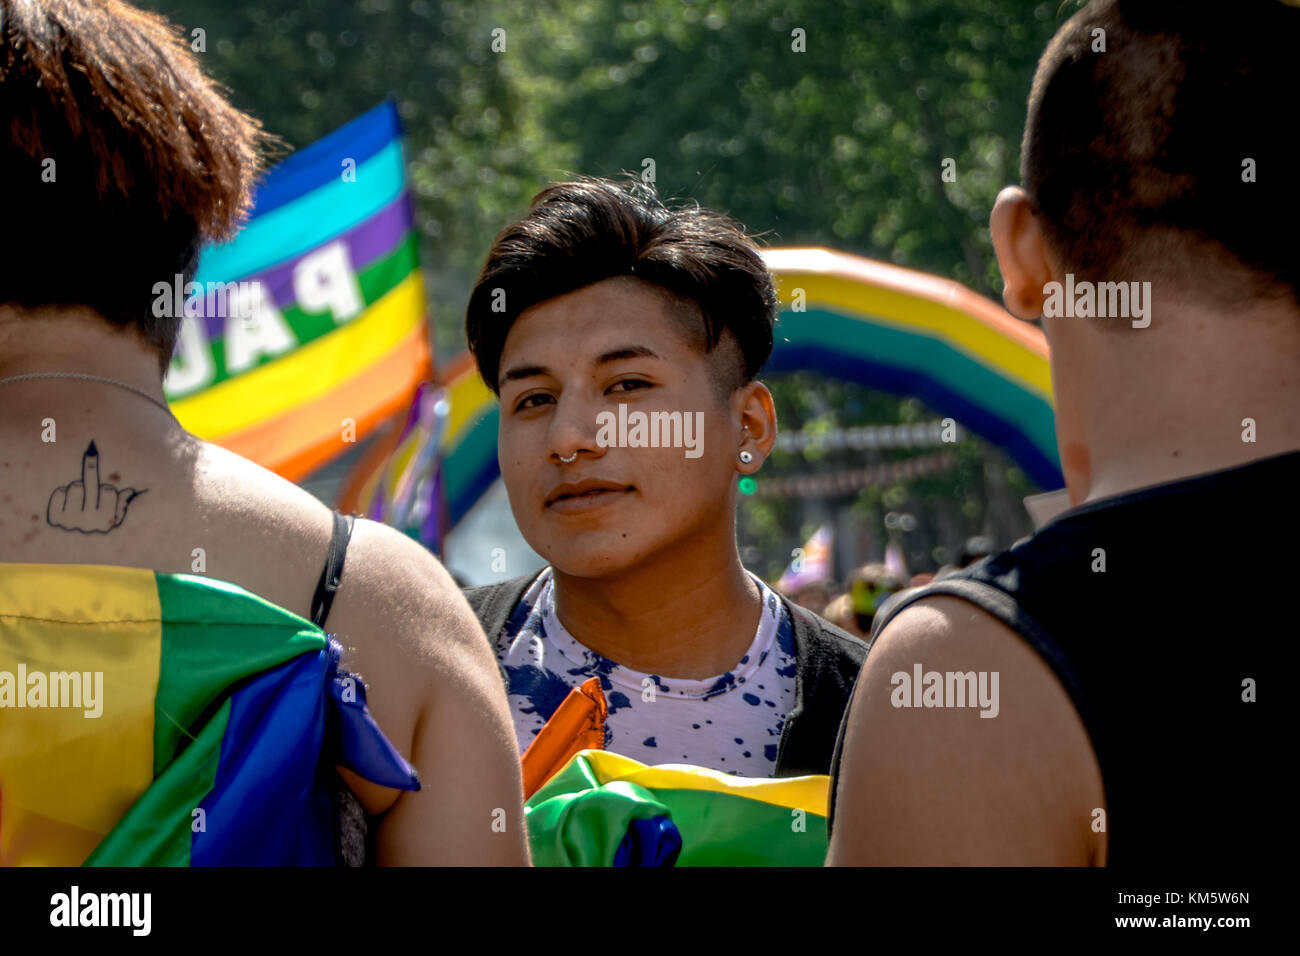 November 18, 2017 - Buenos Aires, Ciudad AutÃ³noma de Buenos Aires, Argentina - With a rainbow archway in the background, a young man is framed by his friends. Thousands of pride supporters marched from Plaza de Mayo to Congreso de la NaciÃ³n during the city's 26th annual Marcha del Orgullo Gay Credit: Jason Sheil/SOPA/ZUMA Wire/Alamy Live News Stock Photo